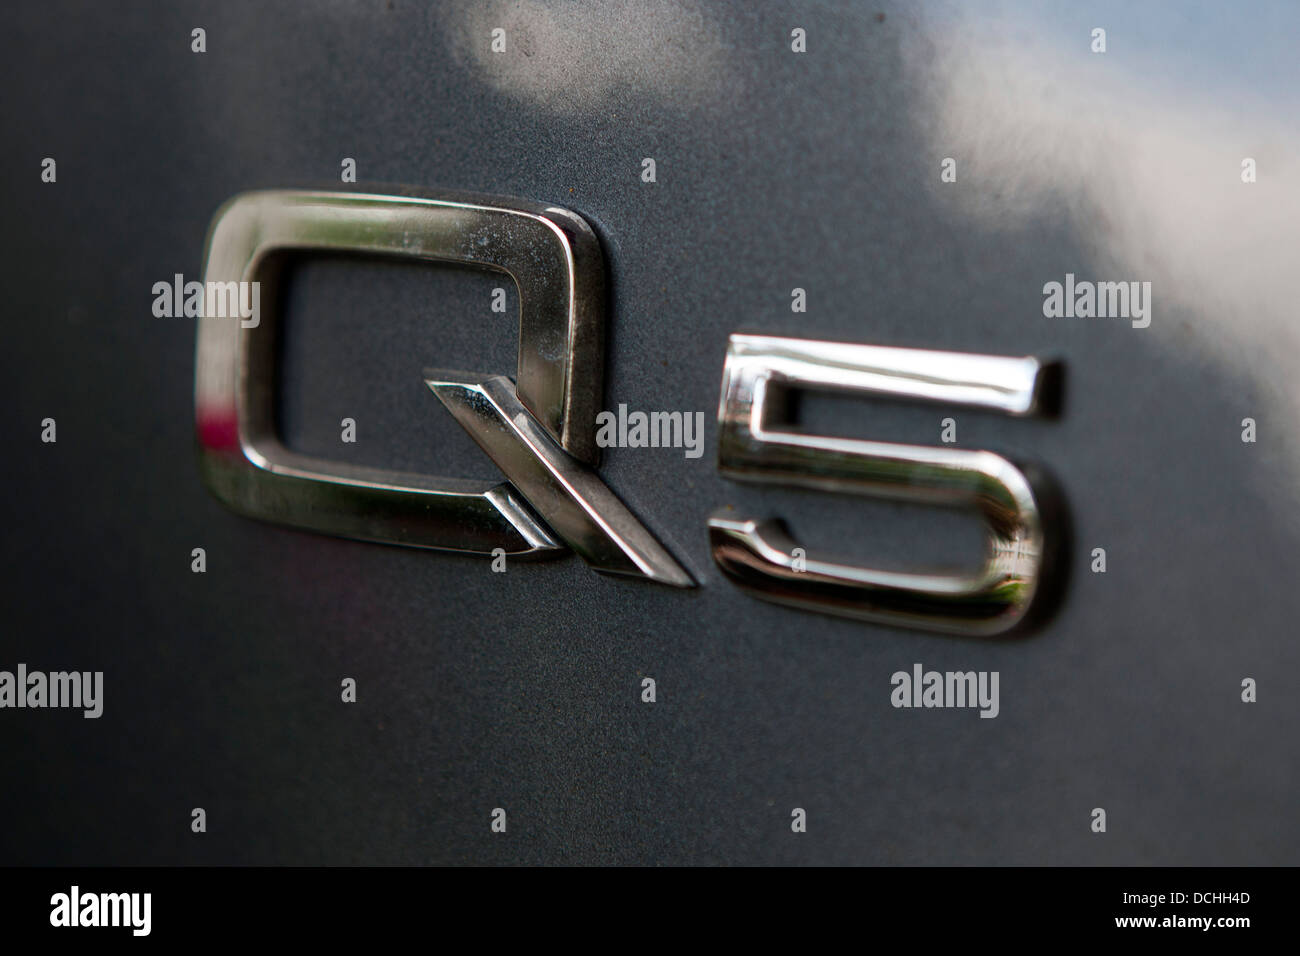 Audi Q5 badge on the side of a grey vehicle Stock Photo